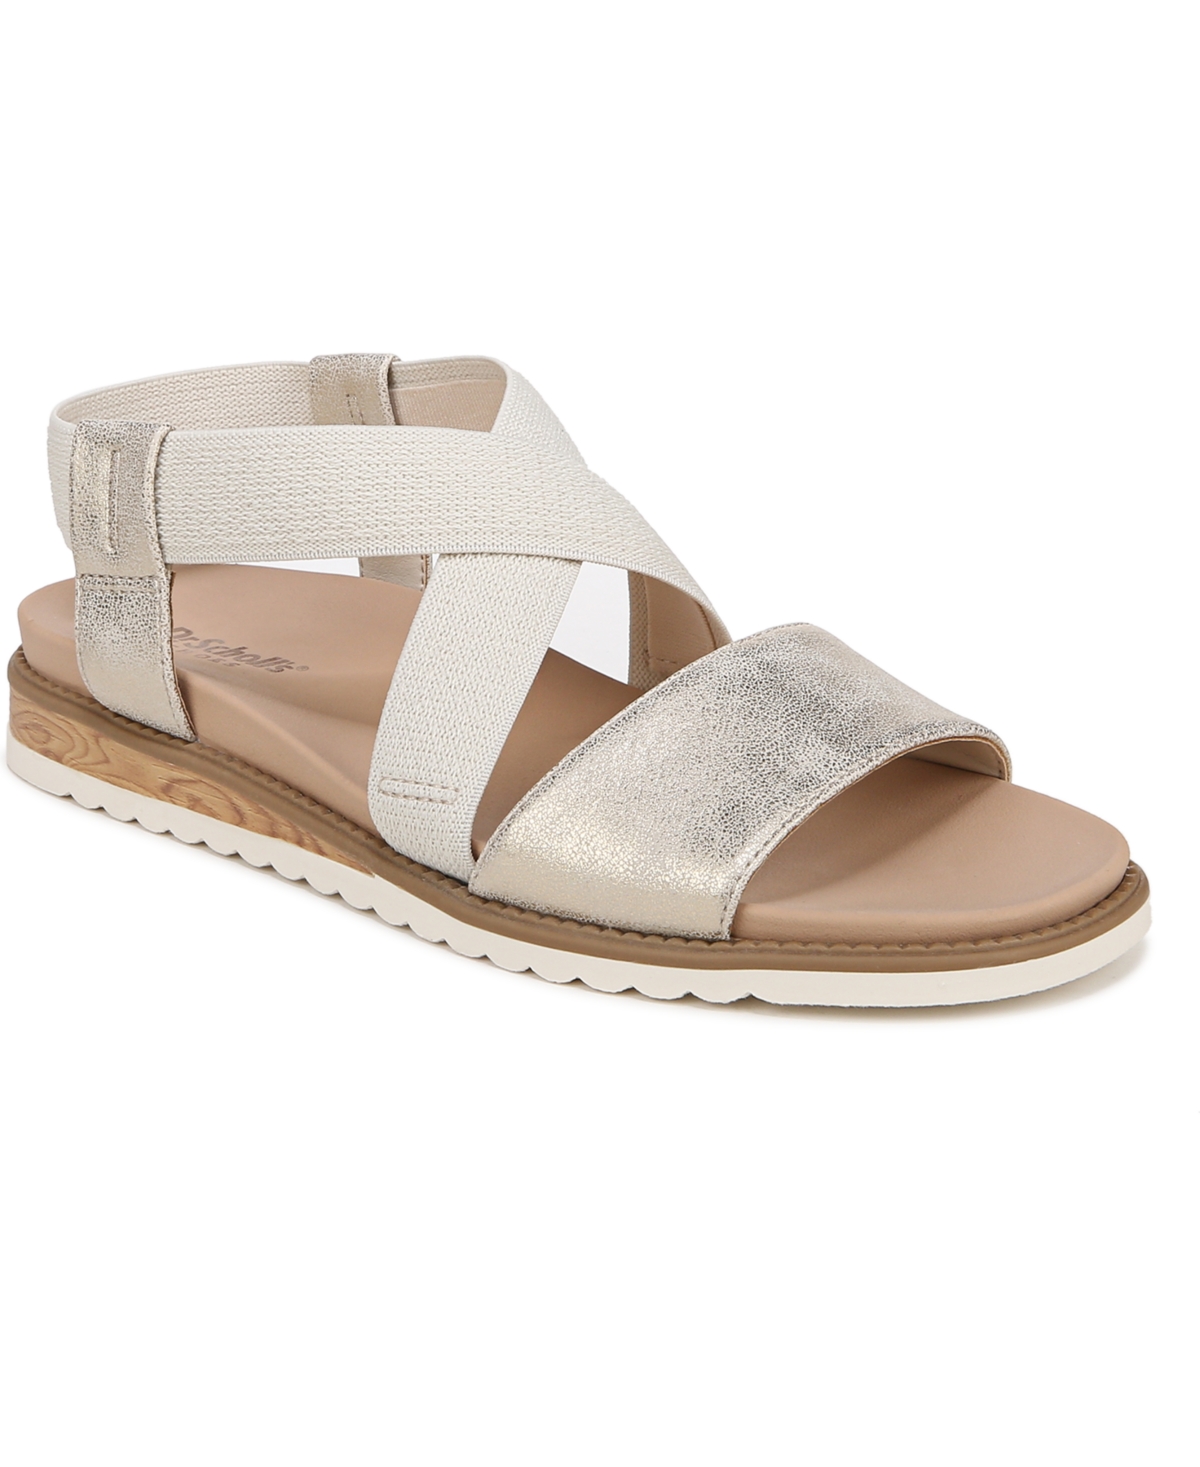 Dr. Scholl's Women's Islander Ankle Strap Sandals In Light Gold Fabric